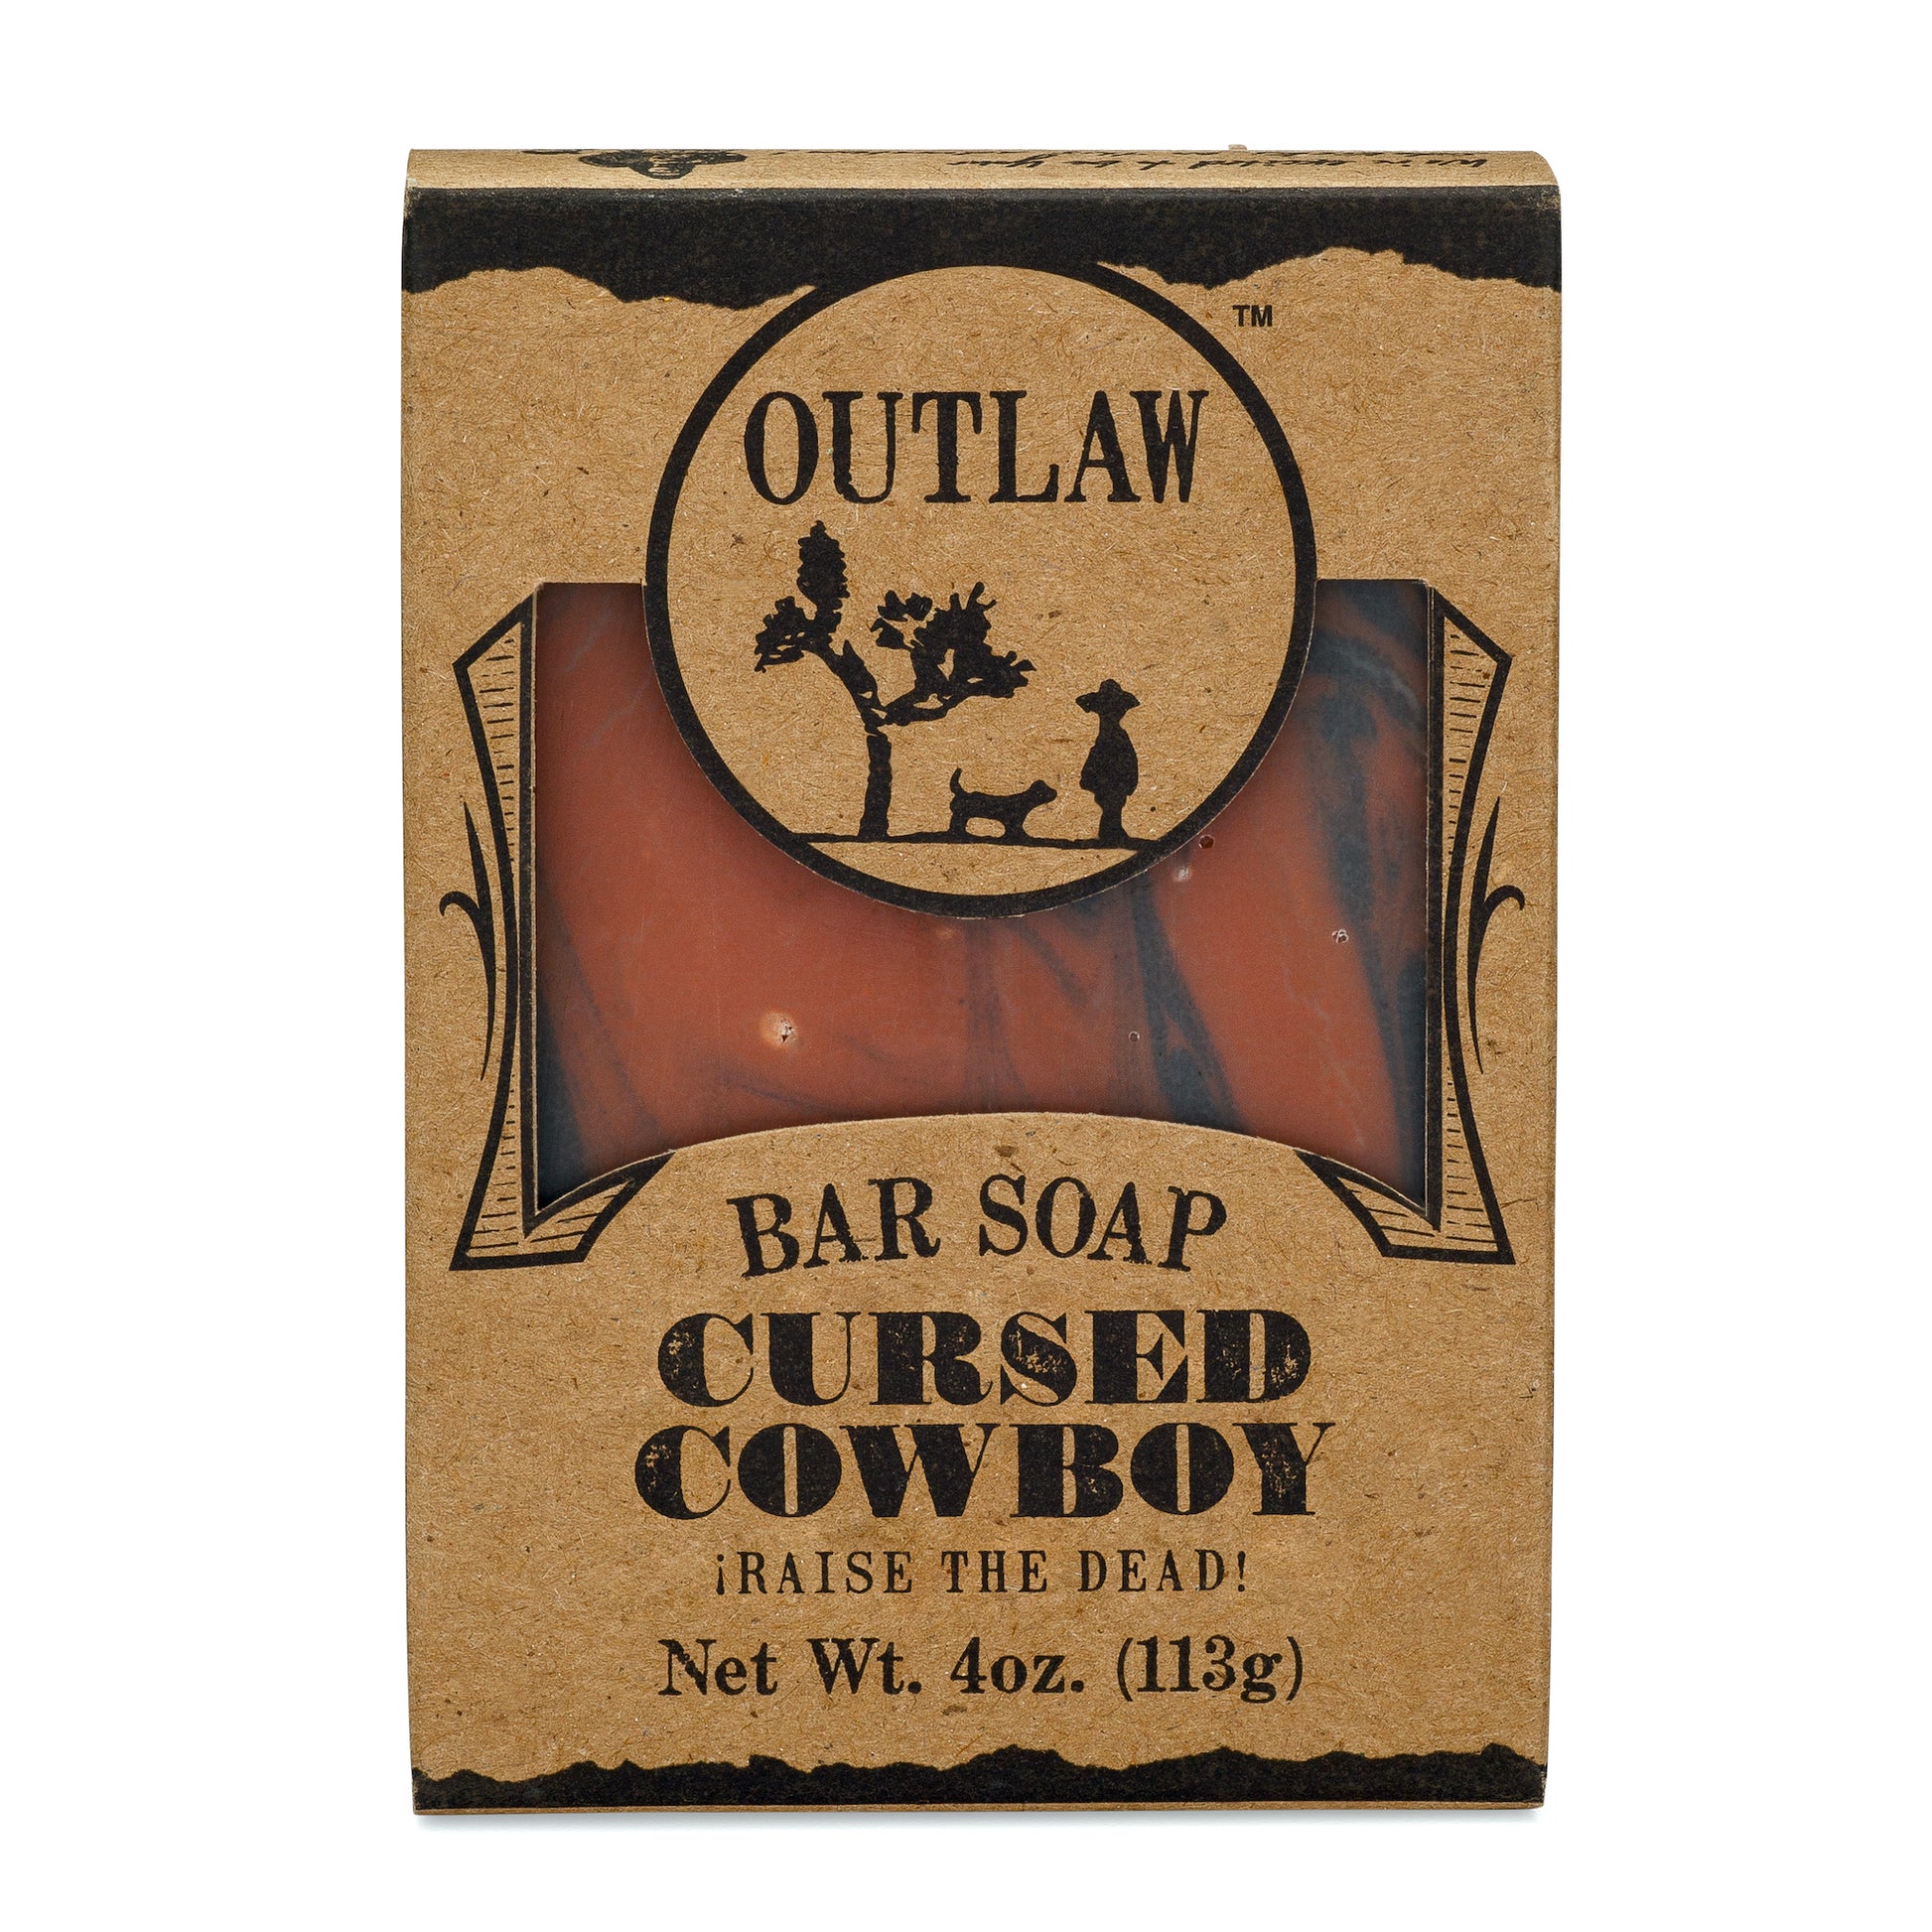 Homemade Soap Bars with Essential Oils - A Cowboy's Wife